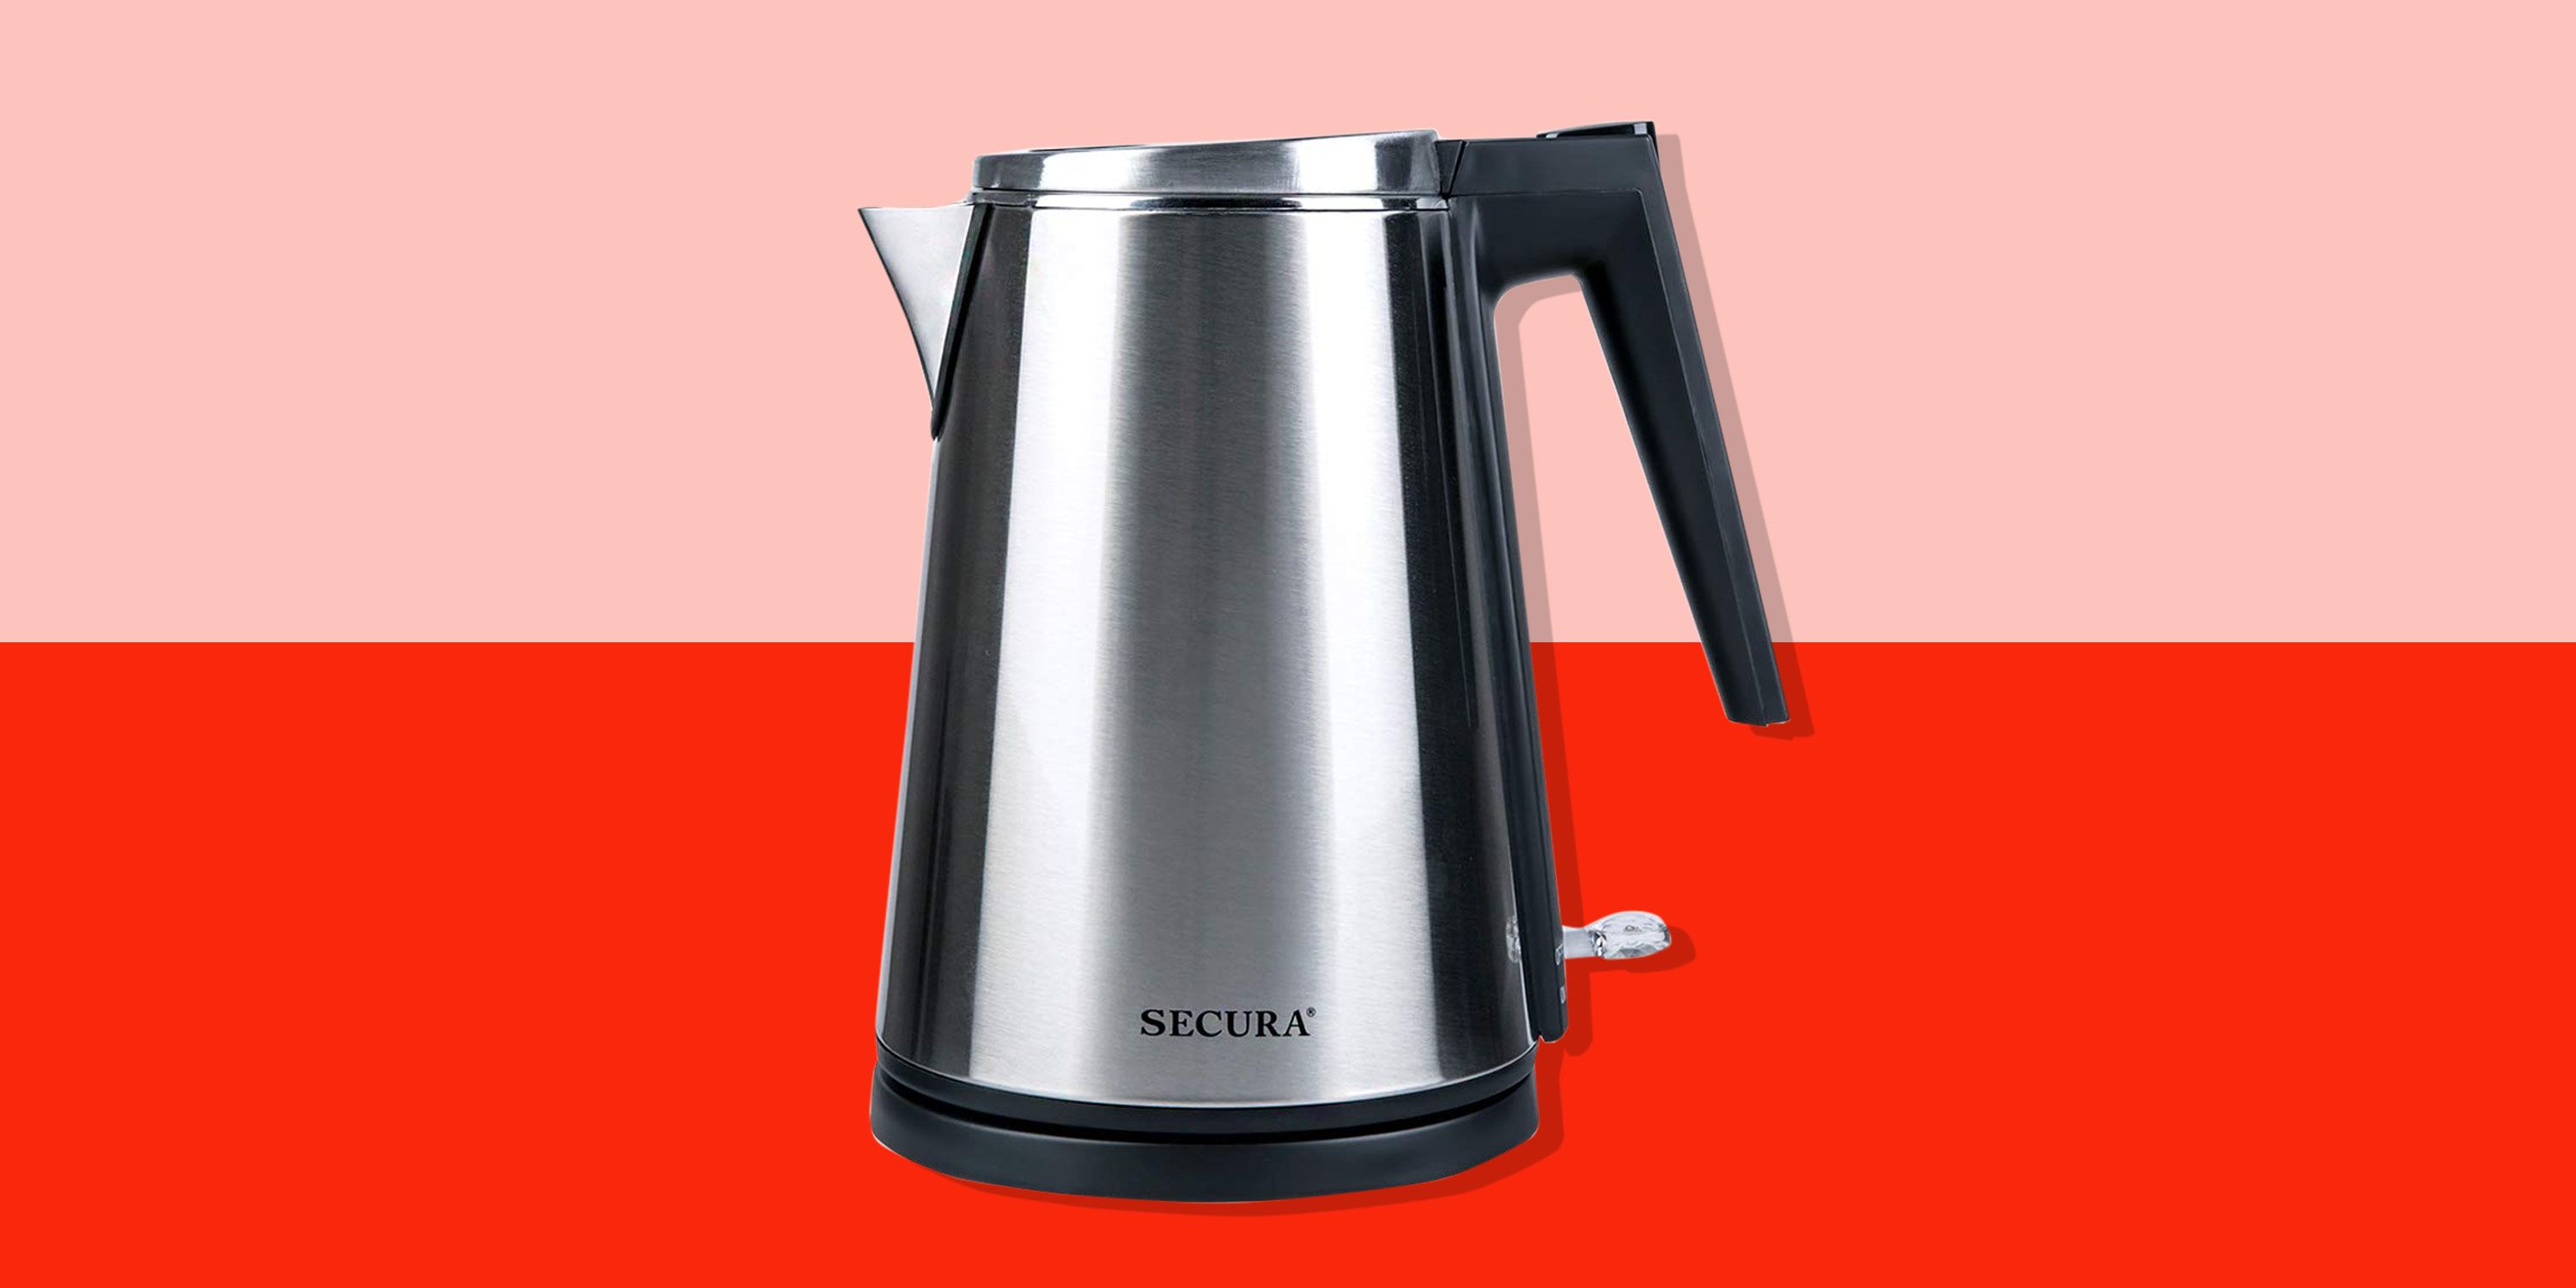 Secura Original Double Wall Electric Kettle on Sale 2019